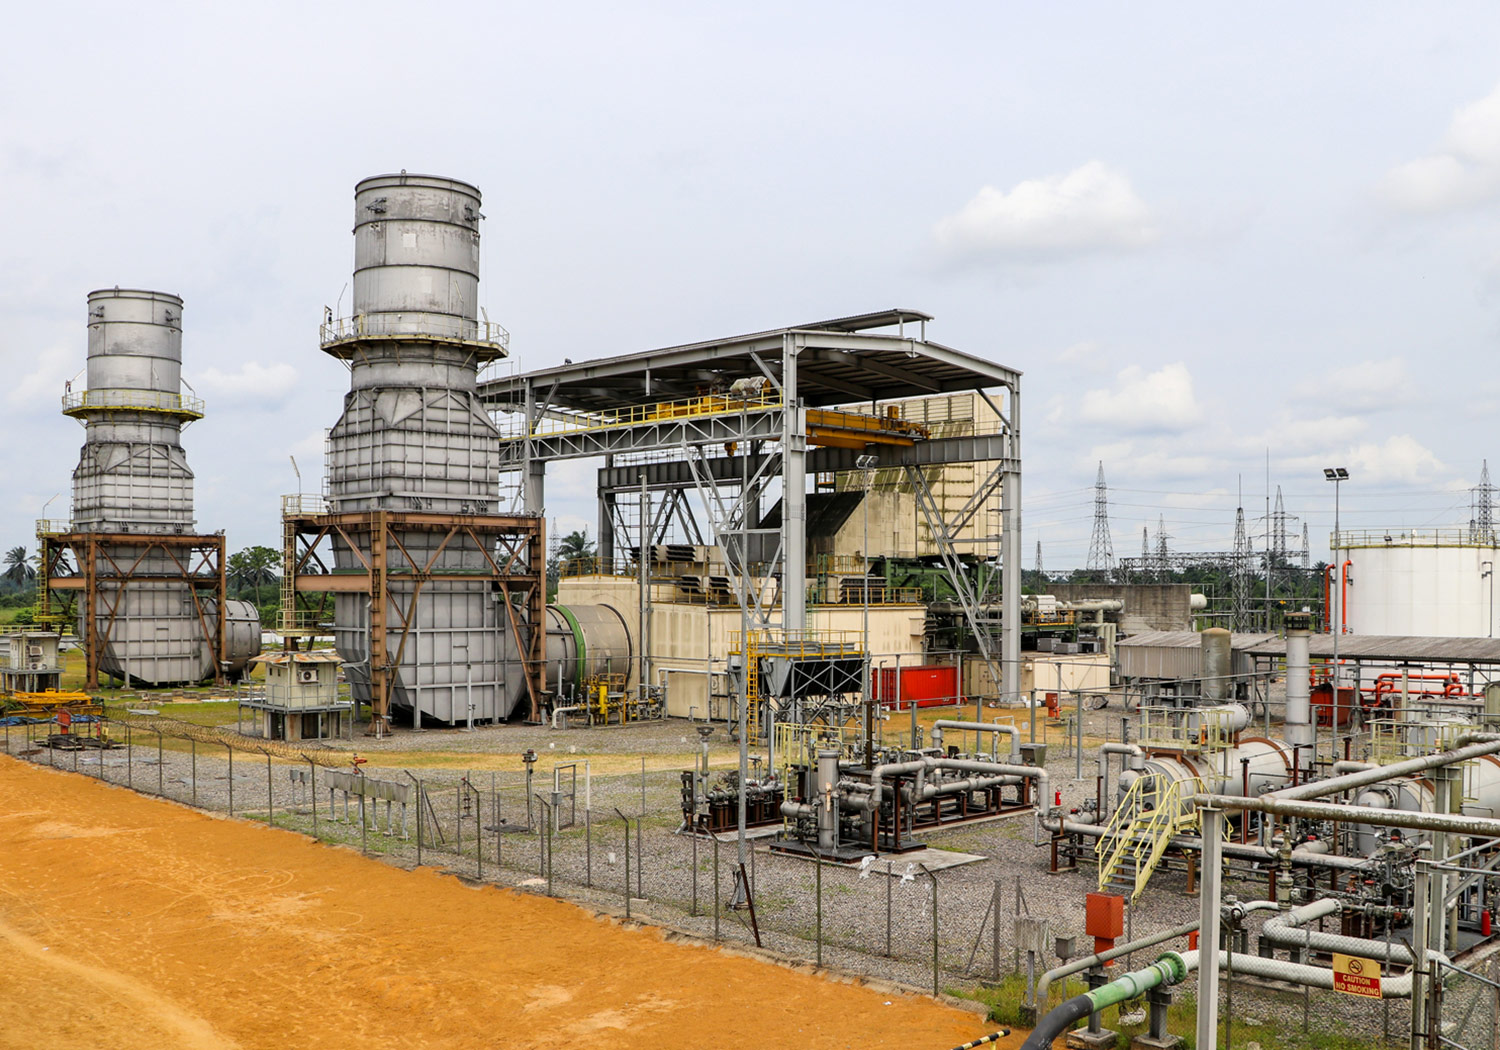 Tanzania turns off power plants due to excess supply